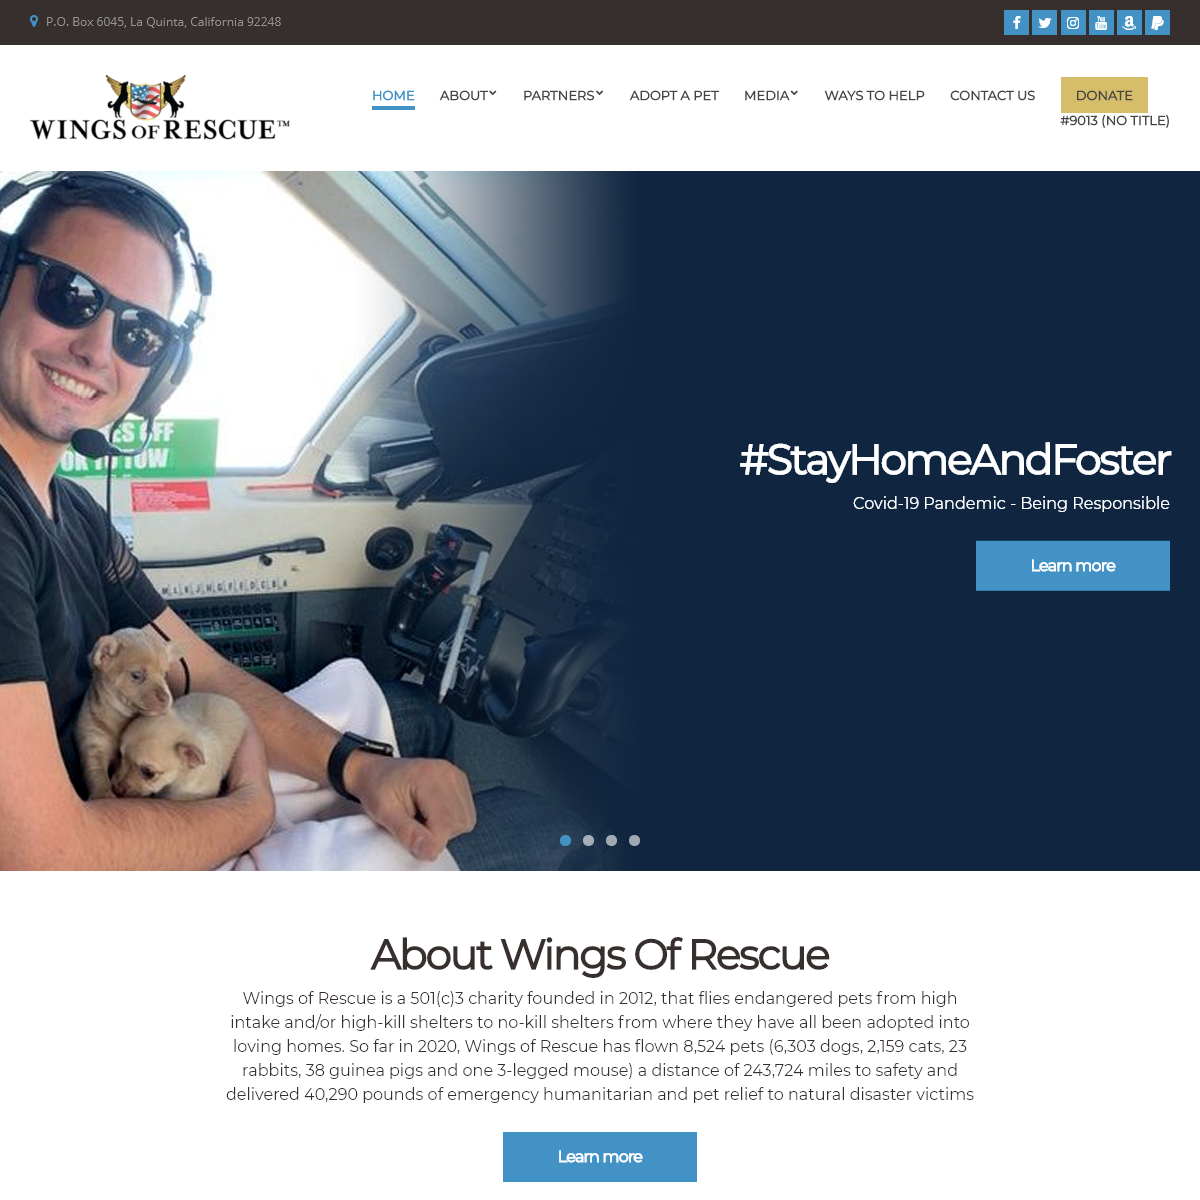 A complete backup of wingsofrescue.org